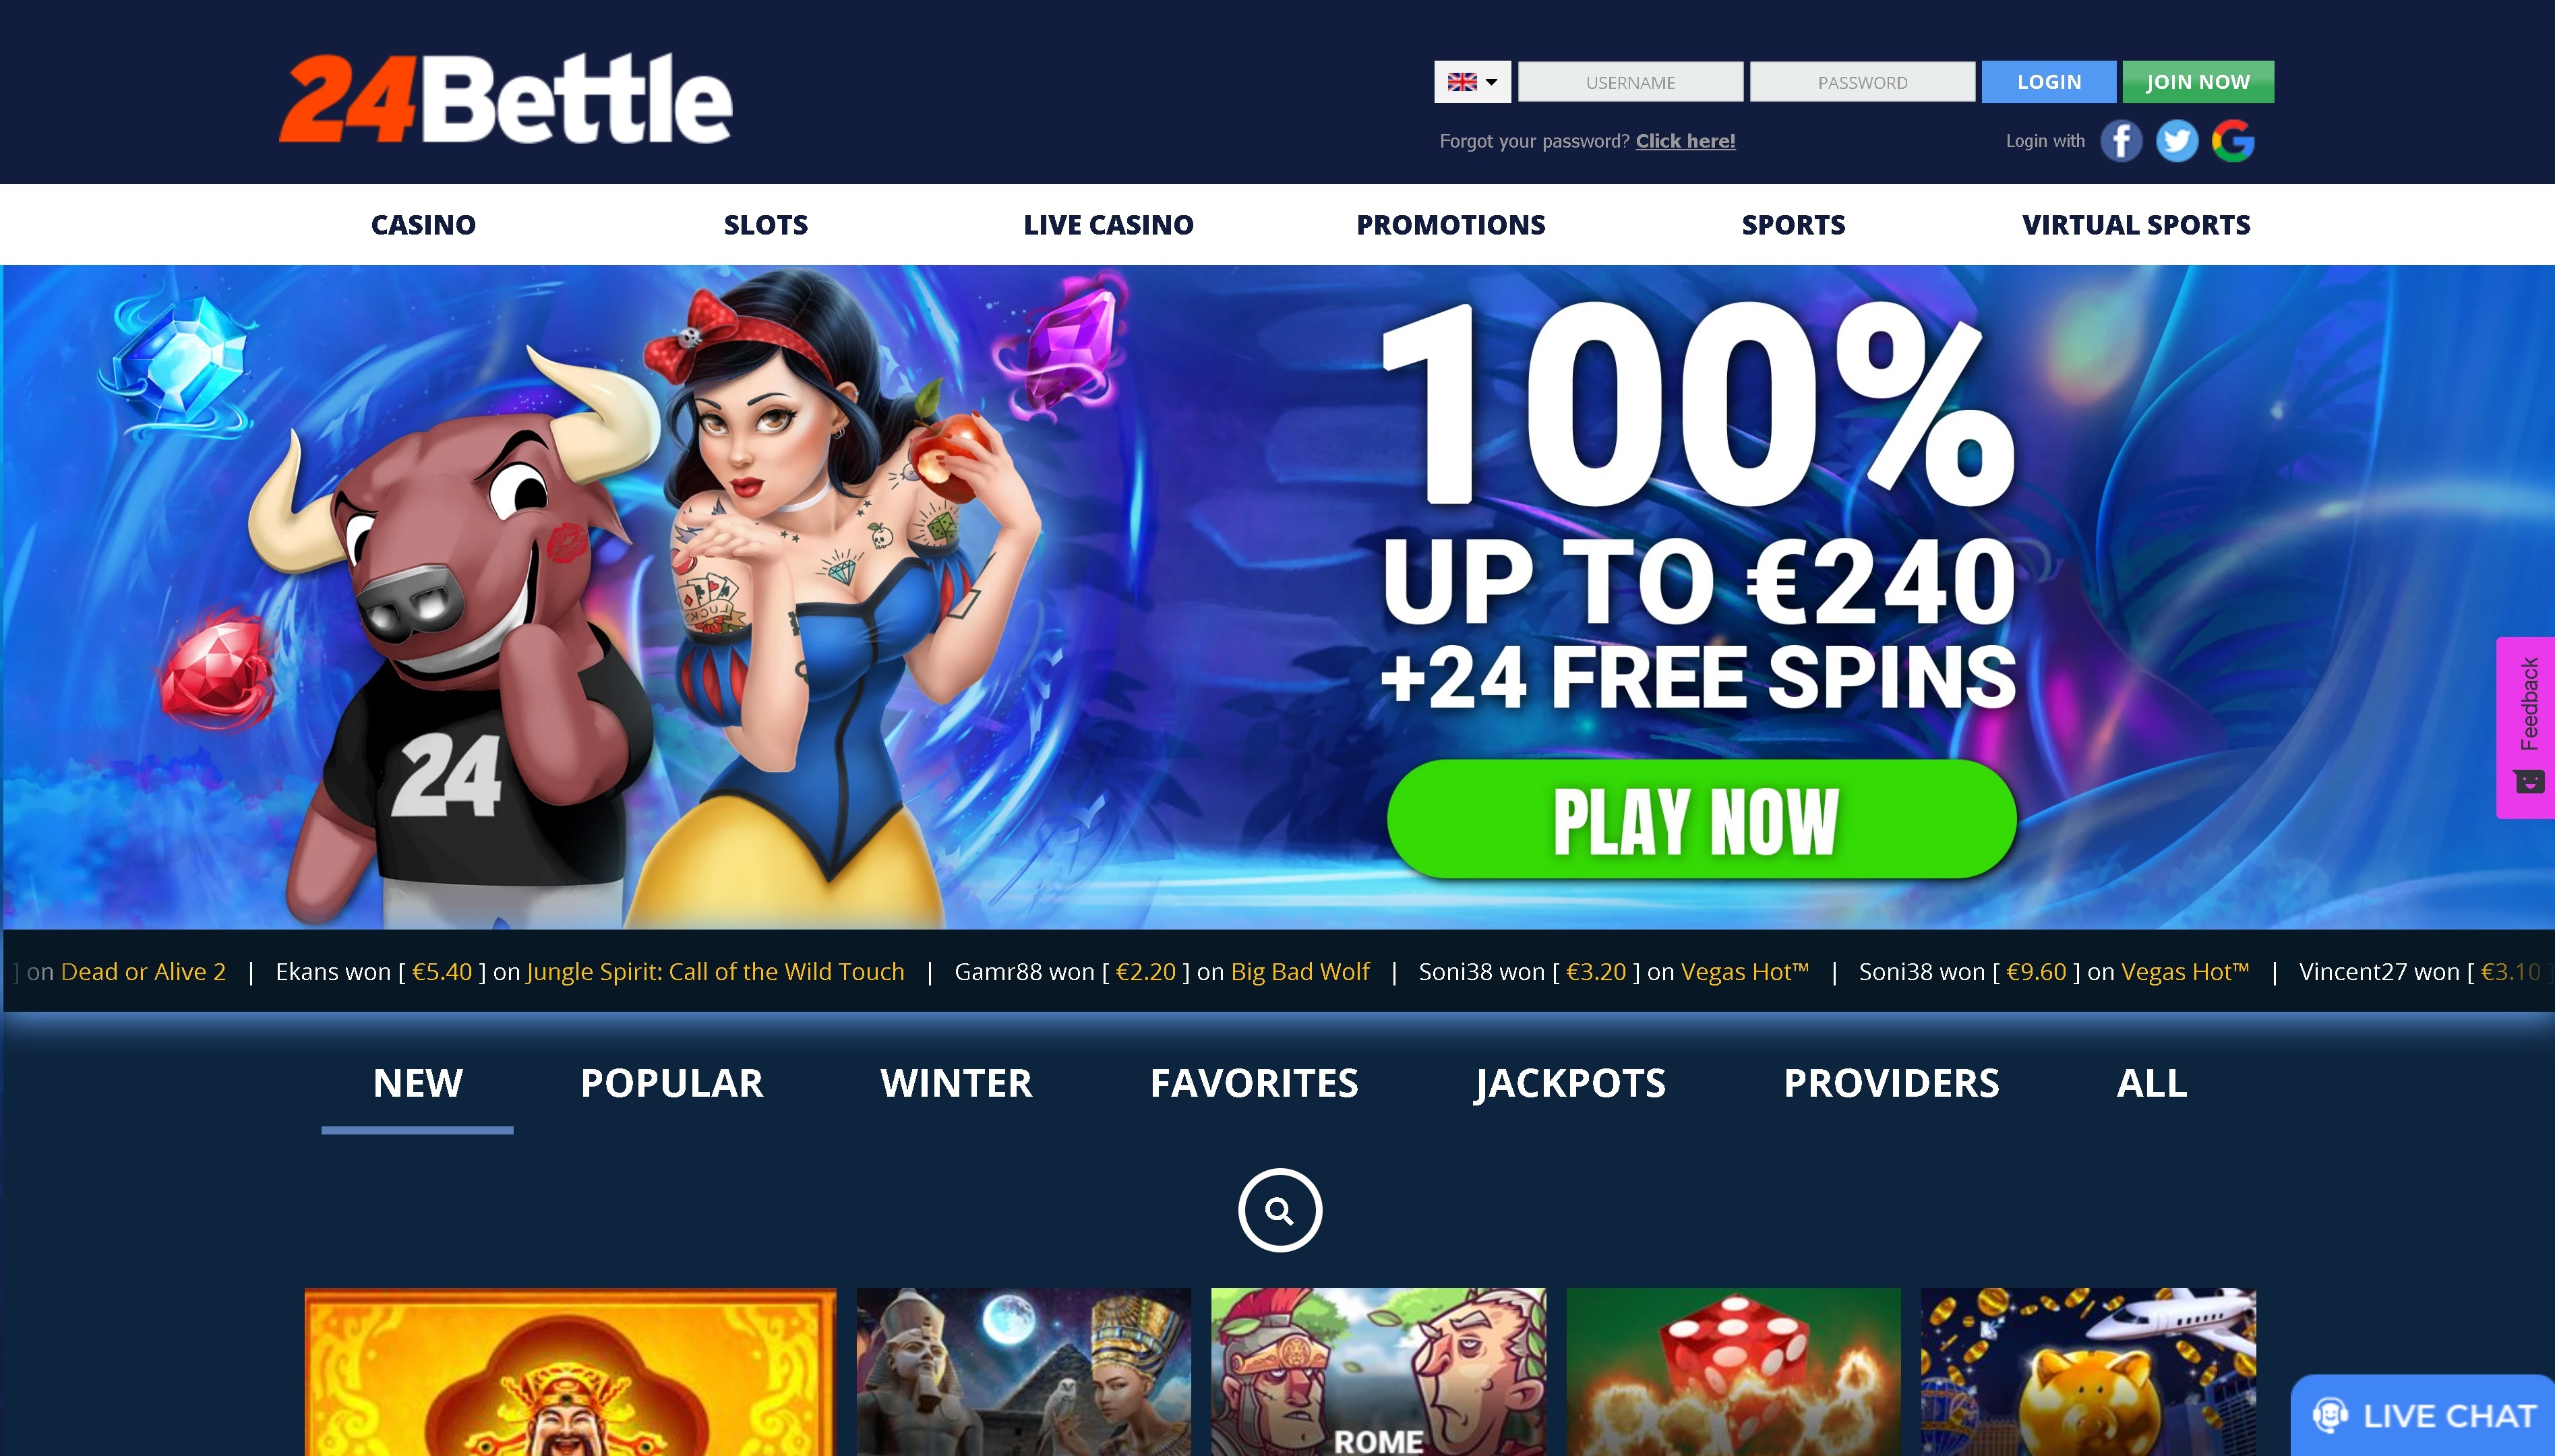 24 Bettle Casino Review